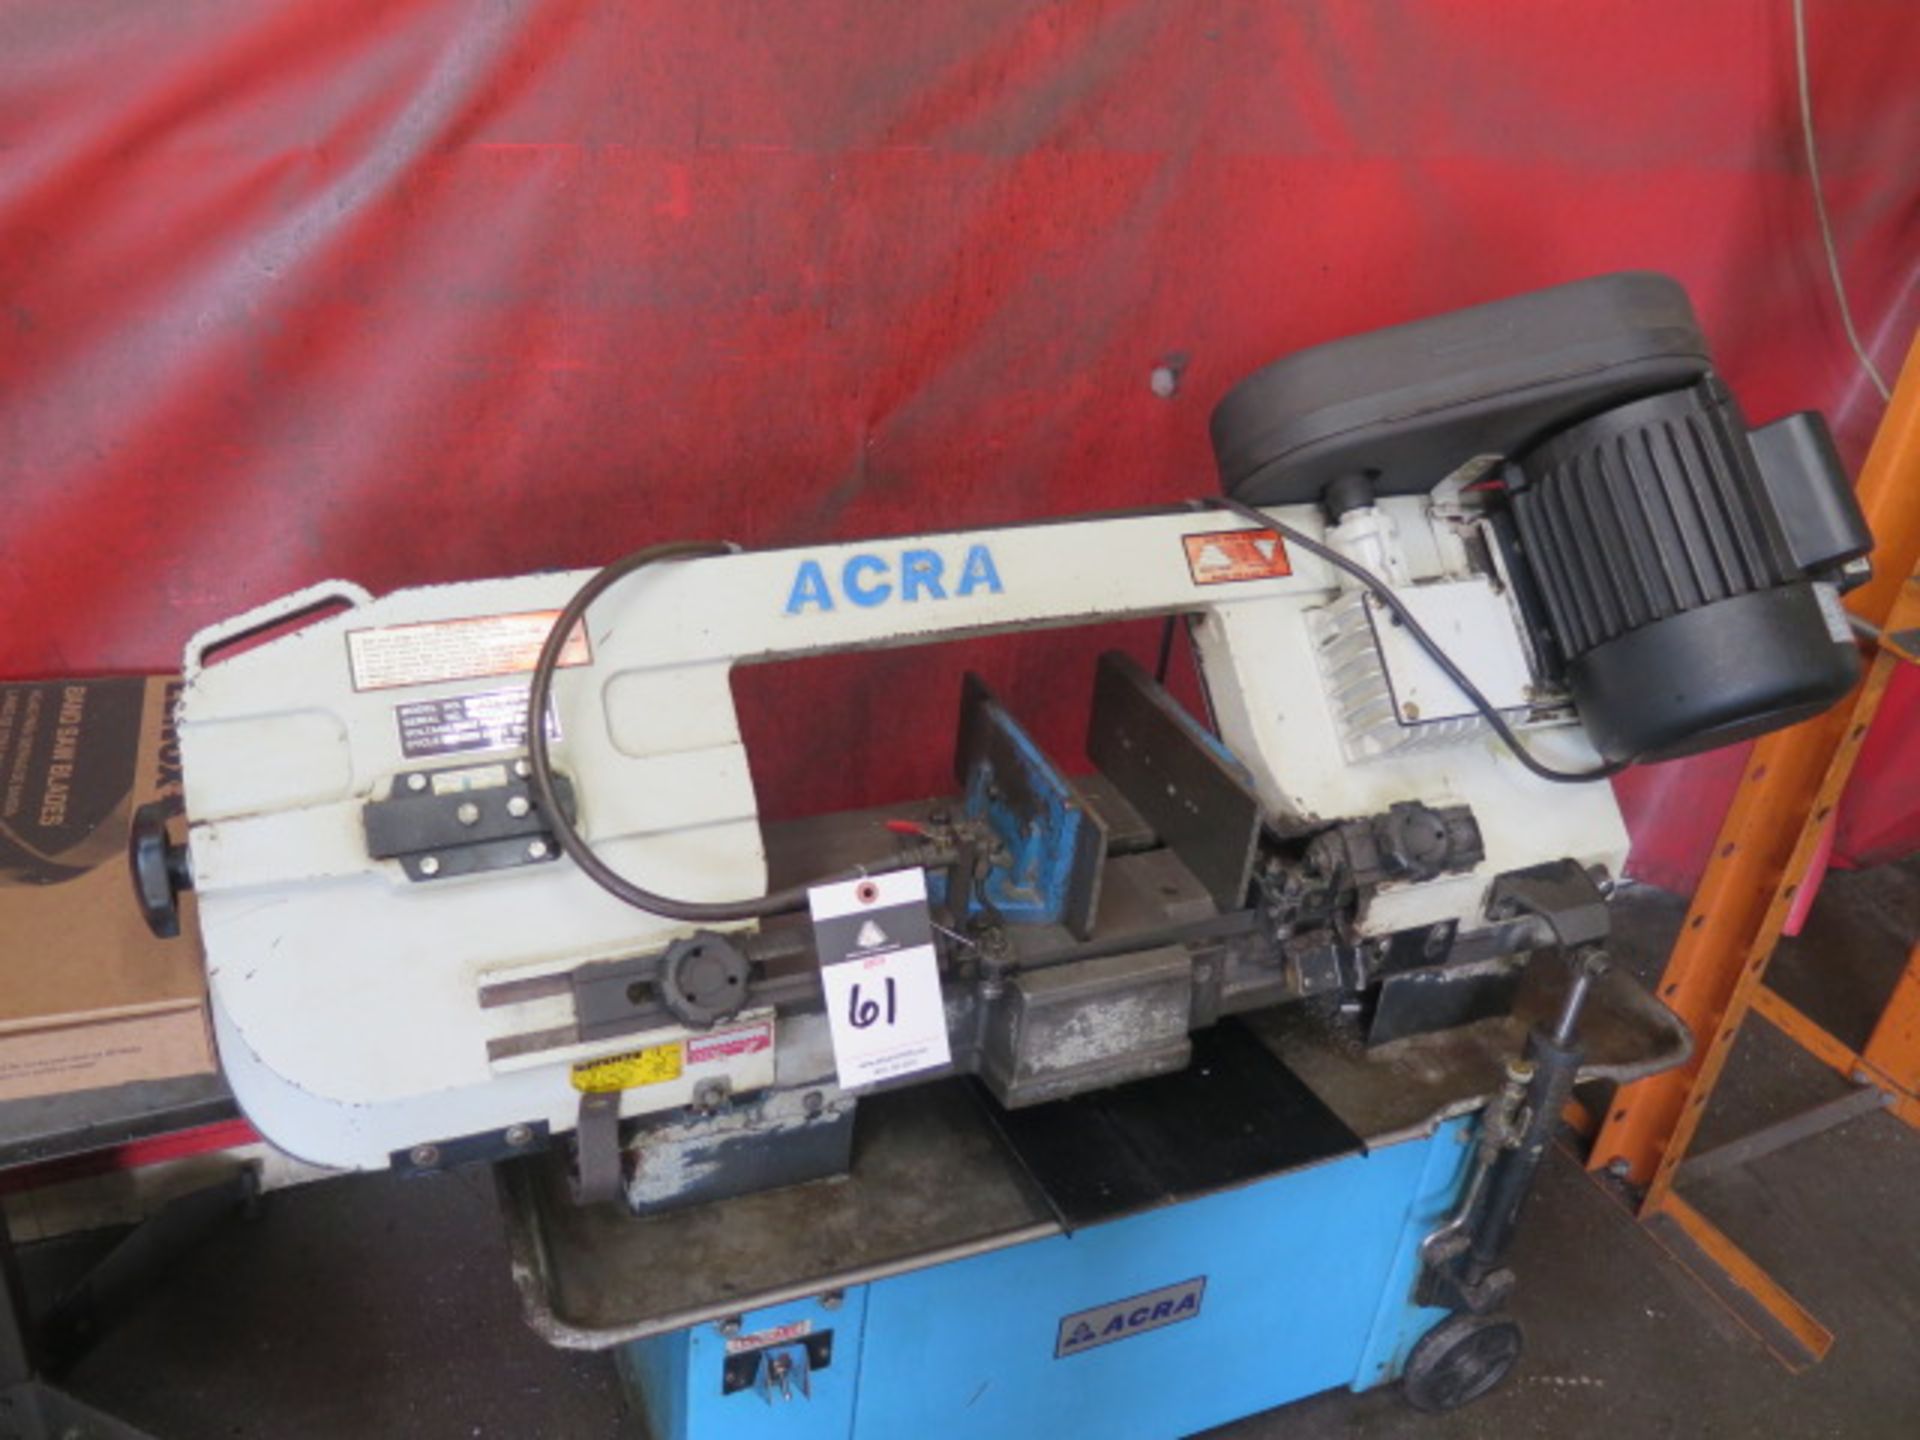 Acra HBS-712 7” Horizontal Band Saw w/ 4-Speeds, Manual Clamping, Coolant - Image 2 of 6